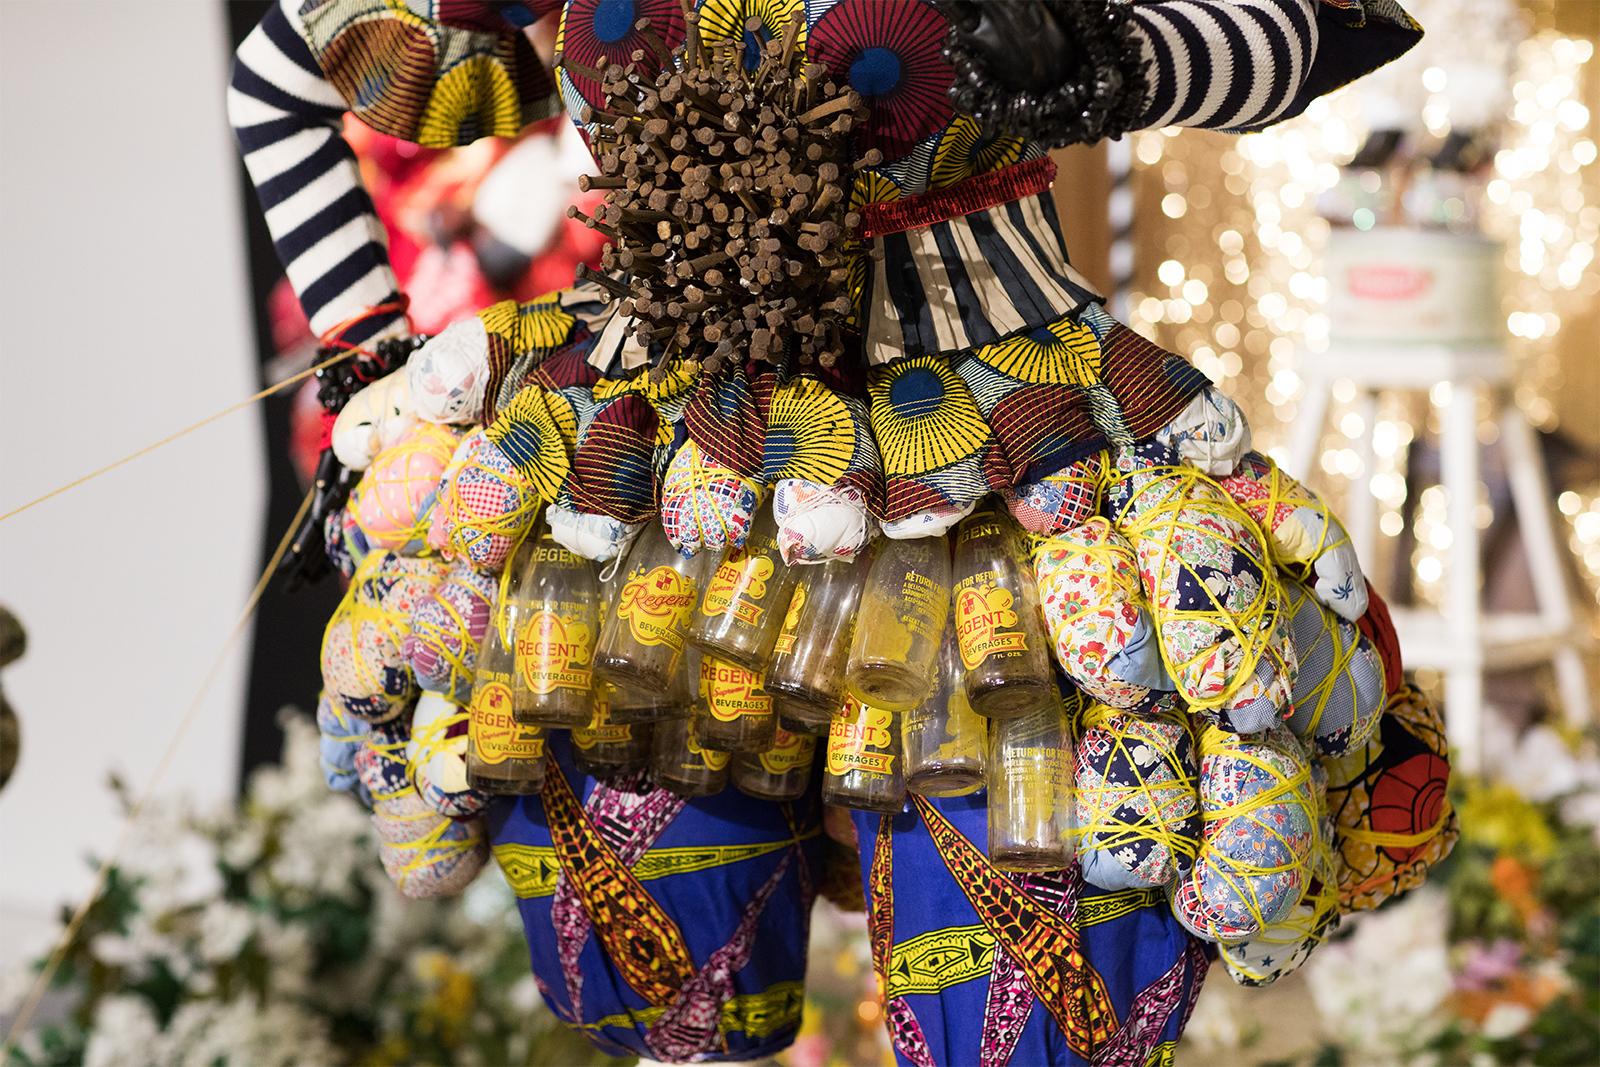 Vanessa German - Detail of assembled figure, wearing a skirt made of bottles, brightly colored fabrics, and a torso full of long, rusted nails.